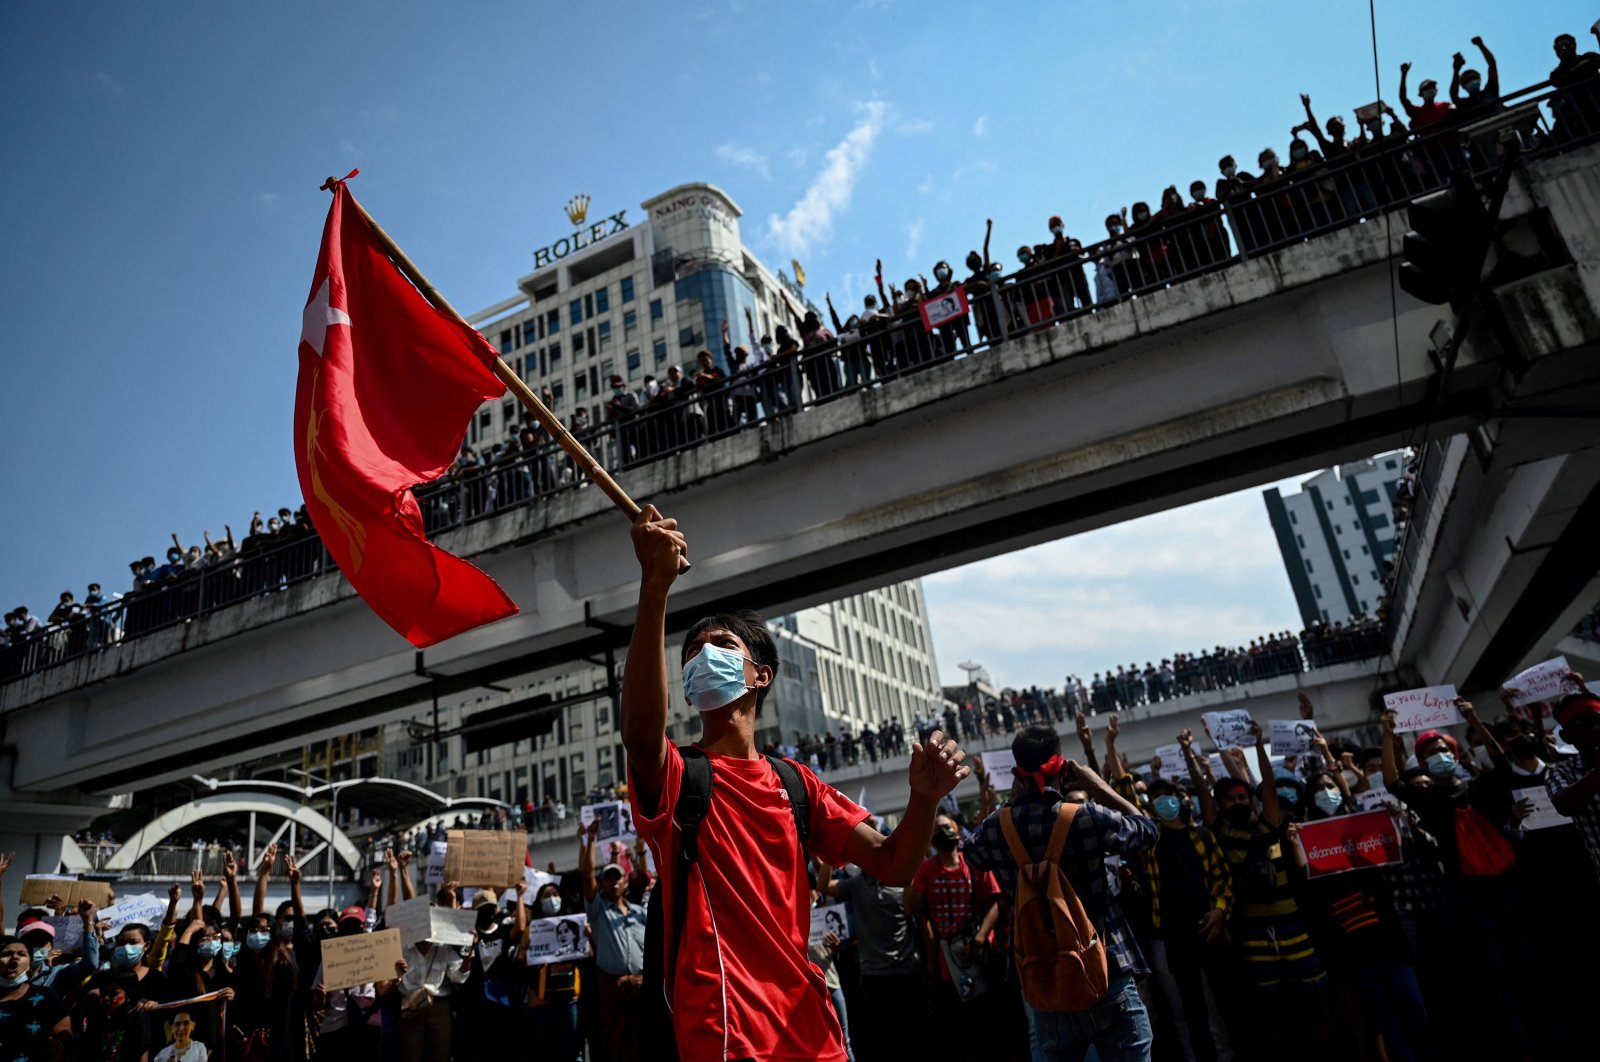 Protesters gather to demonstrate against the February 1 military coup, in downtown Yangon, Feb. 8, 2021. (AFP Photo)